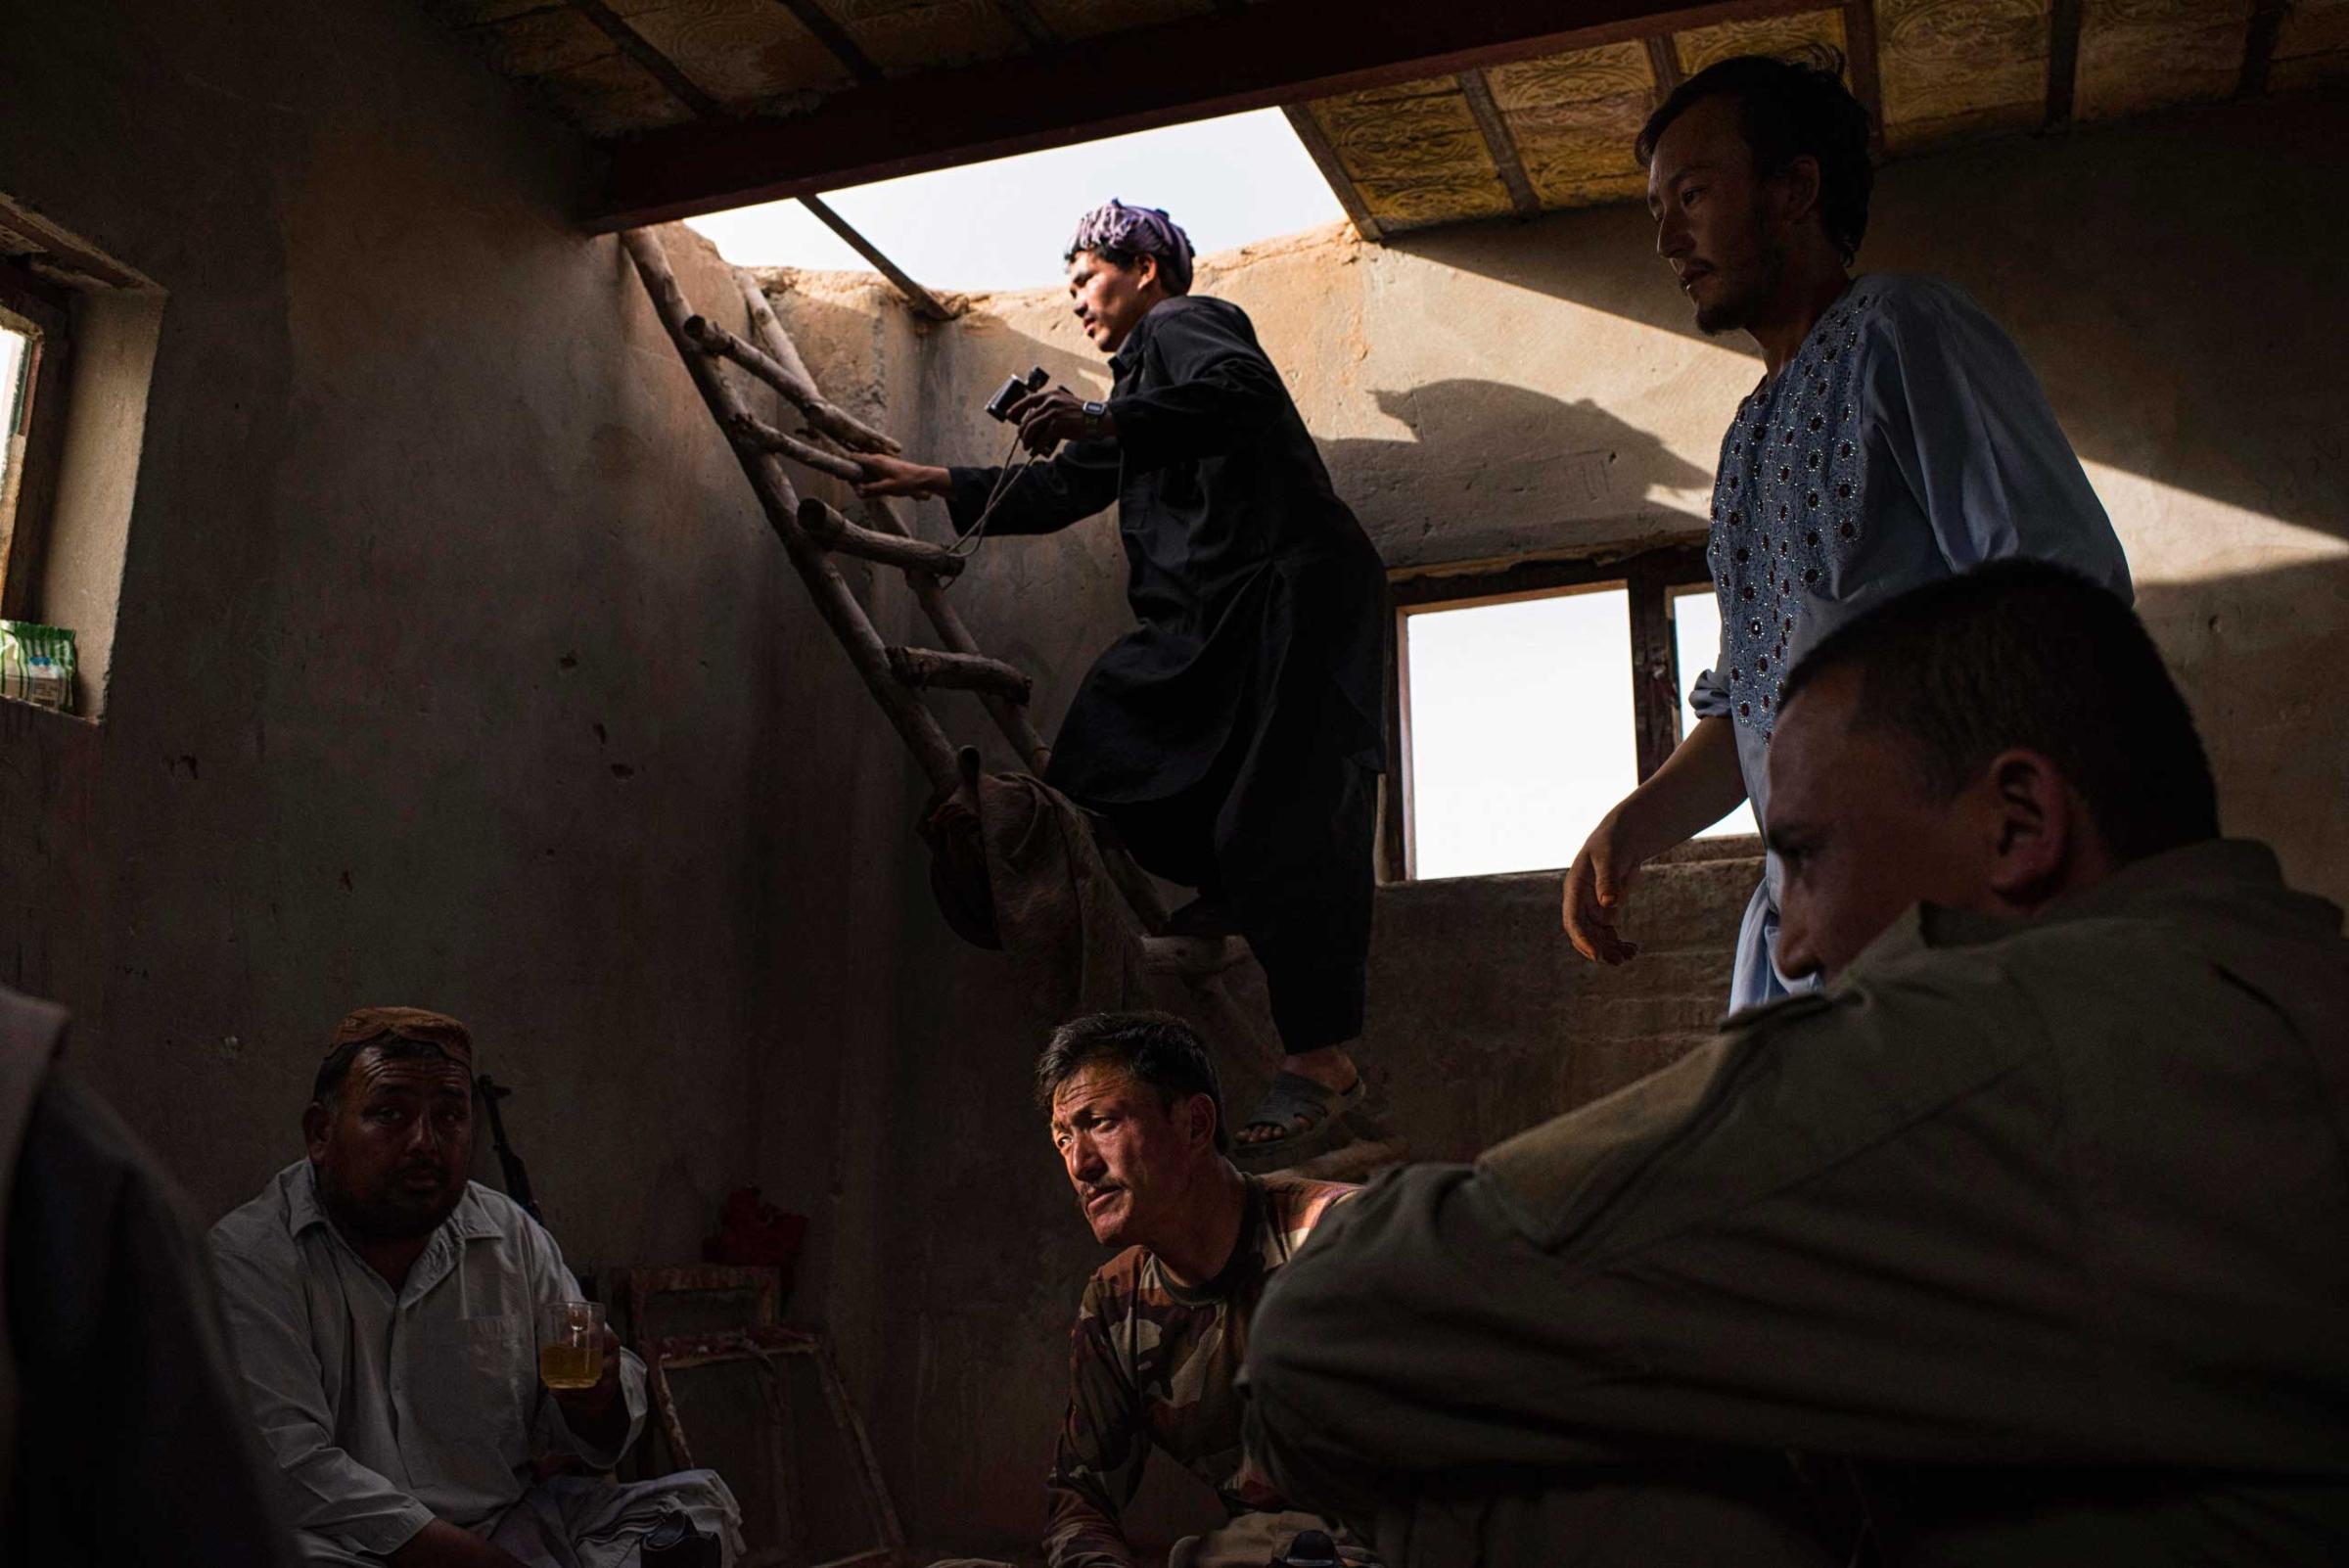 Members of the Afghan Local Police (ALP), one climbing a ladder to keep watch over adjacent fields across which Taliban have conducted raids, inside an ALP outpost in the Sayedabad area of Helmand's Nadali District. Taliban-controlled villages are only a few hundred metres away. After years of relative calm in Nadali District, the ALP, with the support of the Afghan National Army (ANA), are now maintaining the tenuous frontline against the ever-encroaching Taliban who have pushed closer than ever to the nearby Provincial capital, Lashkar Gah, in recent months. The ALP are between a rock and a hard place - unable to lay down their arms because of the immediate proximity of Taliban fighters but under-equipped to provide adequate protection for the villages they protect and call home.